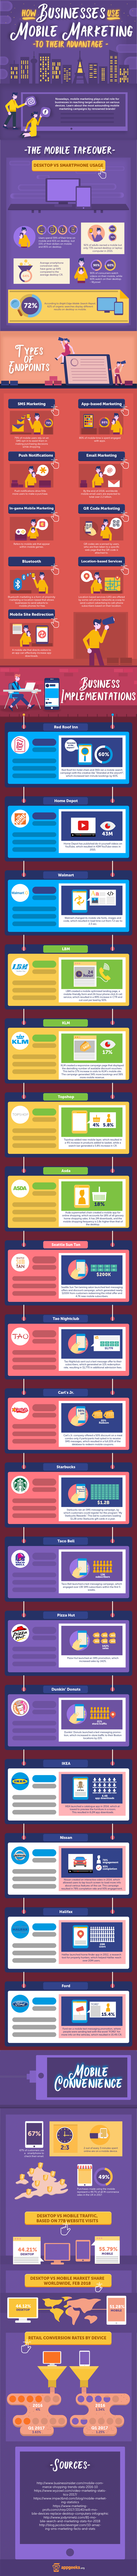 mobile marketing infographic 